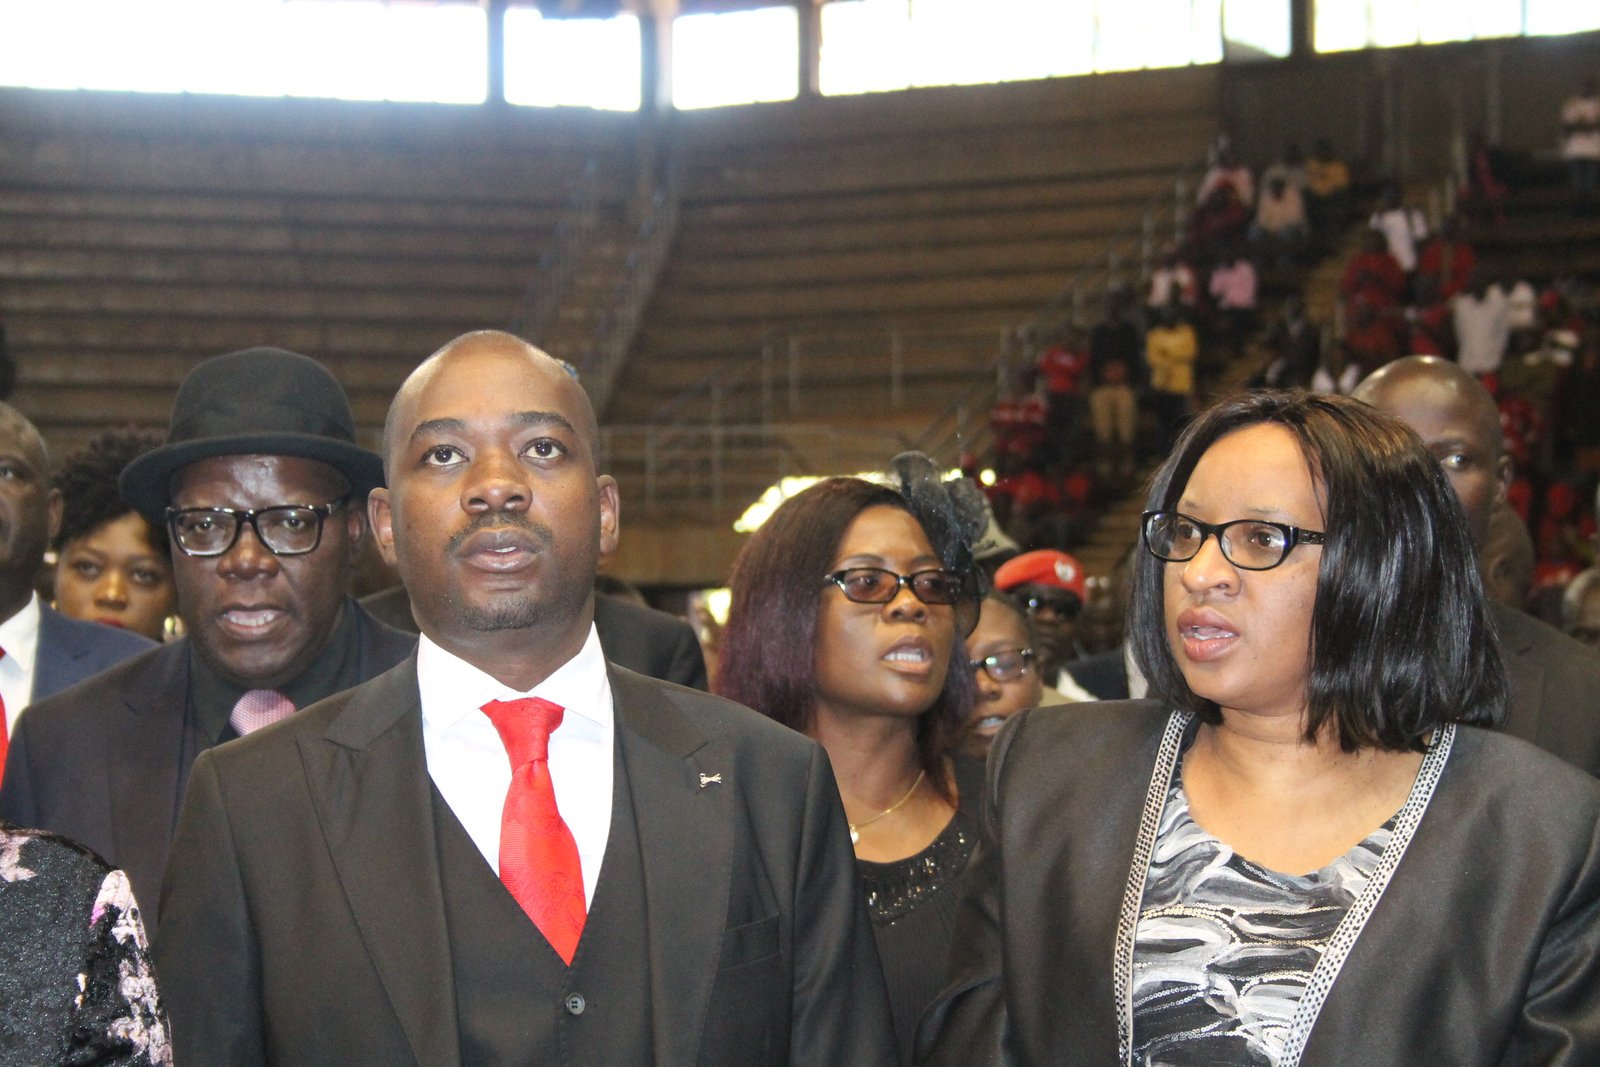 Chamisa was against the MDC Alliance name